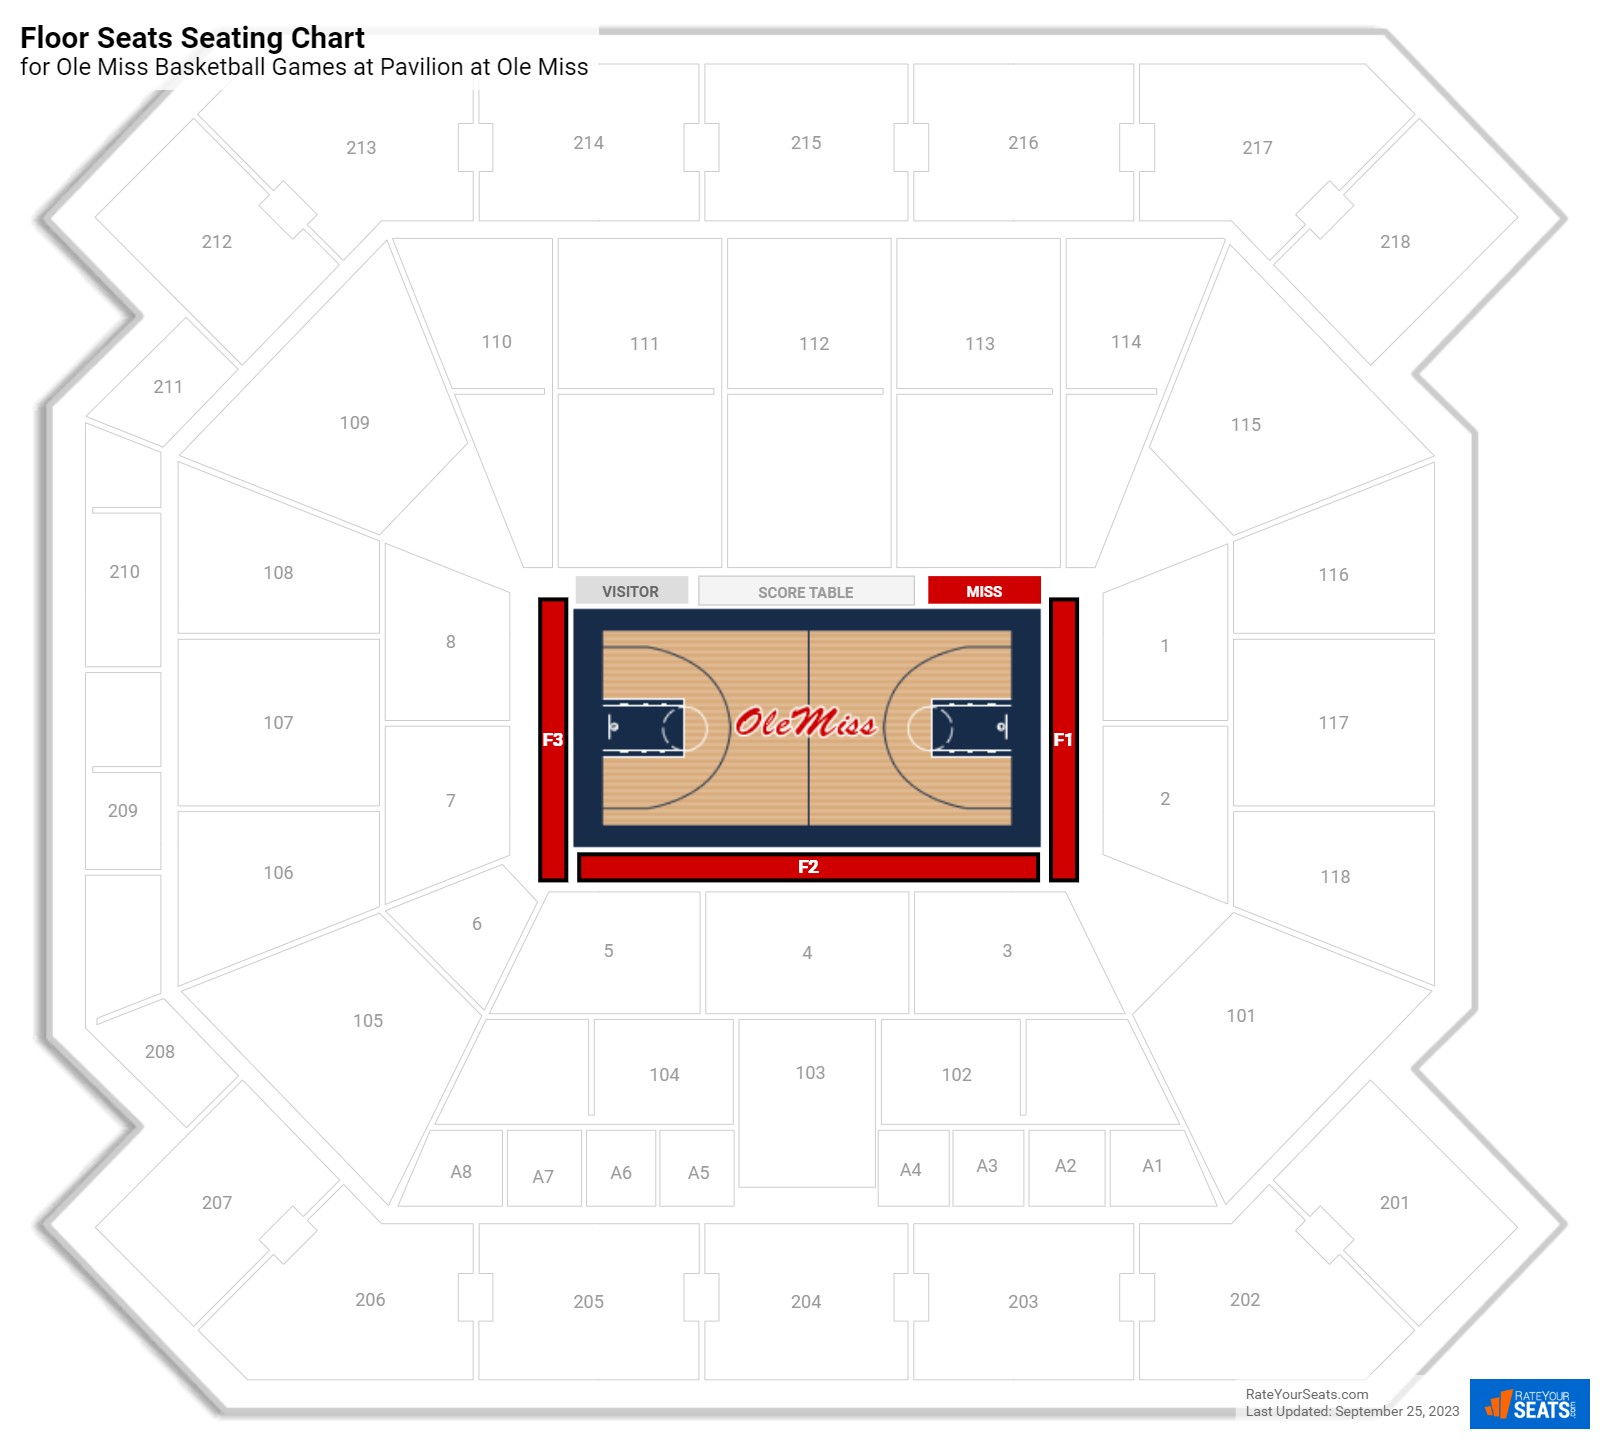 Ole Miss Floor Seats Seating Chart at Pavilion at Ole Miss